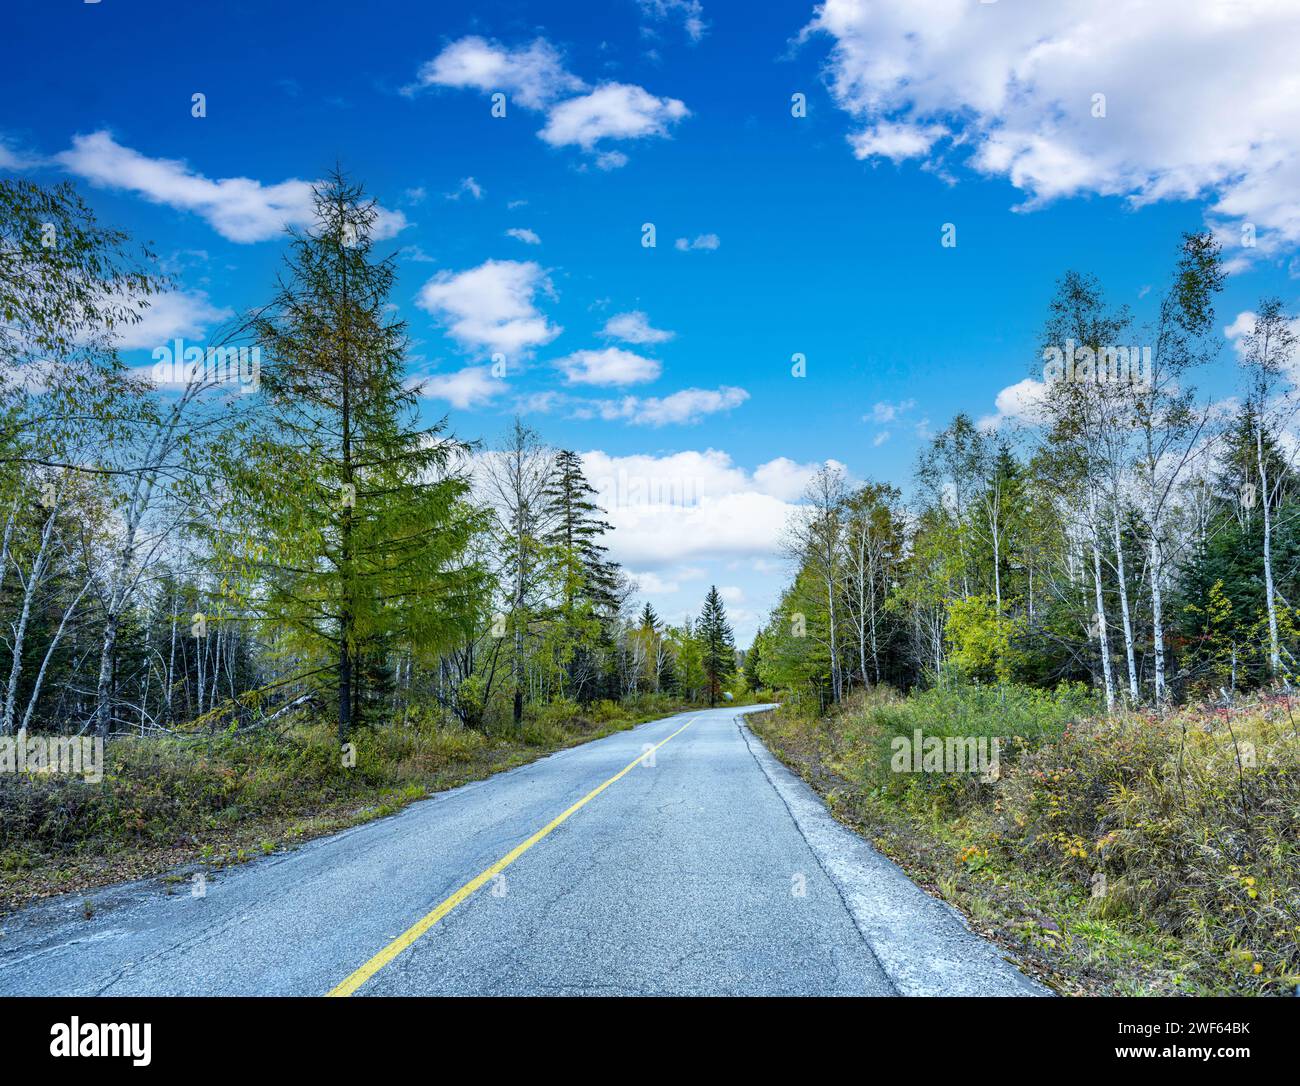 The up and down mountain tourist road in the mixed deciduous and broad-leaved forest area of Changbai Mountain West Scenic Area, Fusong County, Yanbian Korean Autonomous Prefecture, Lin Province Stock Photo